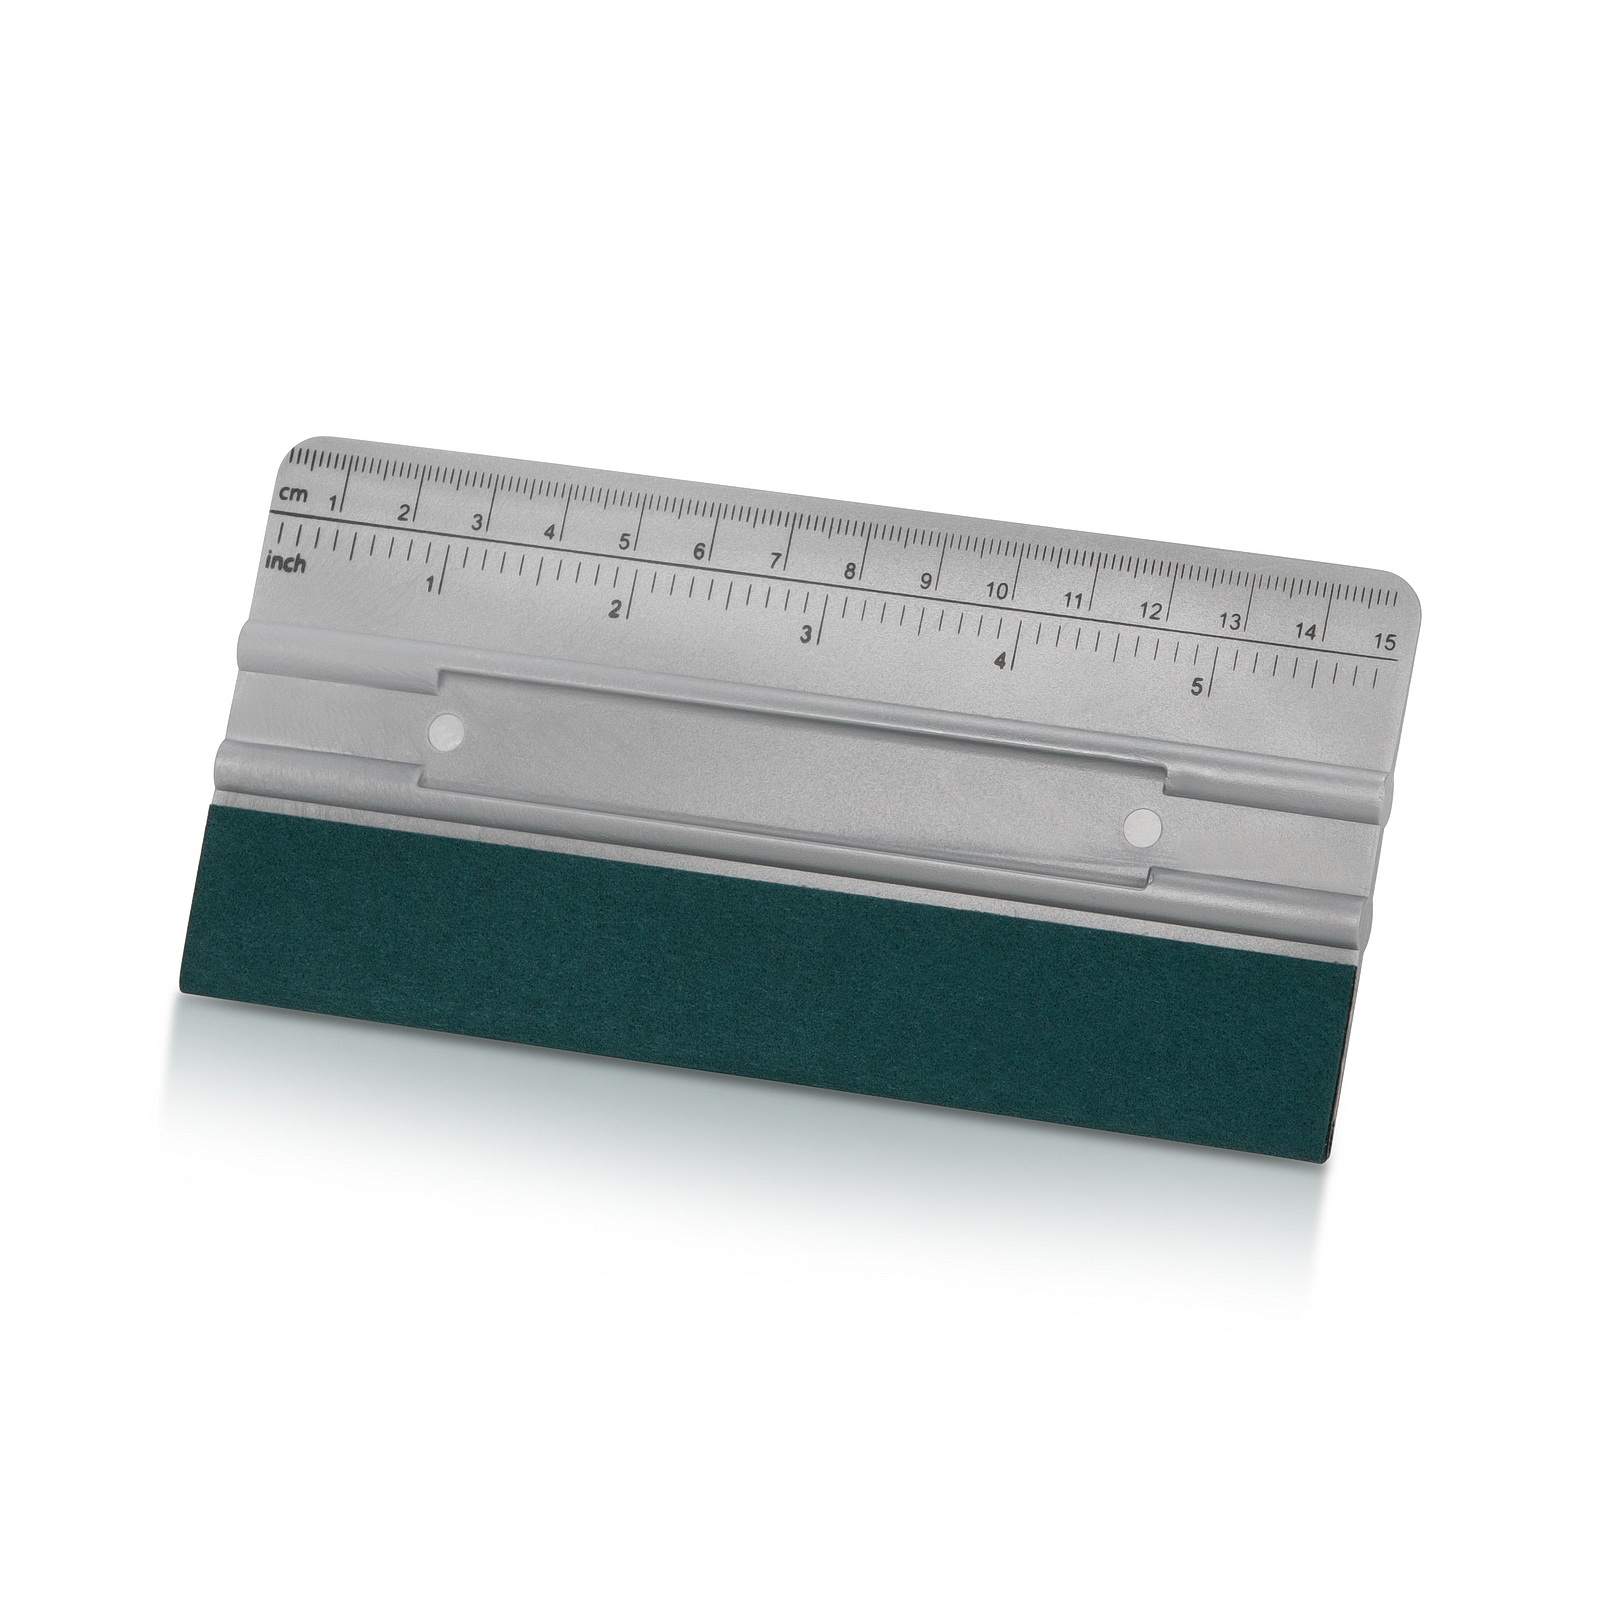 6'' x 3'' Gray Squeegee, Medium Hardness with Suede Felt and Ruler For Film and Vinyl Tucking